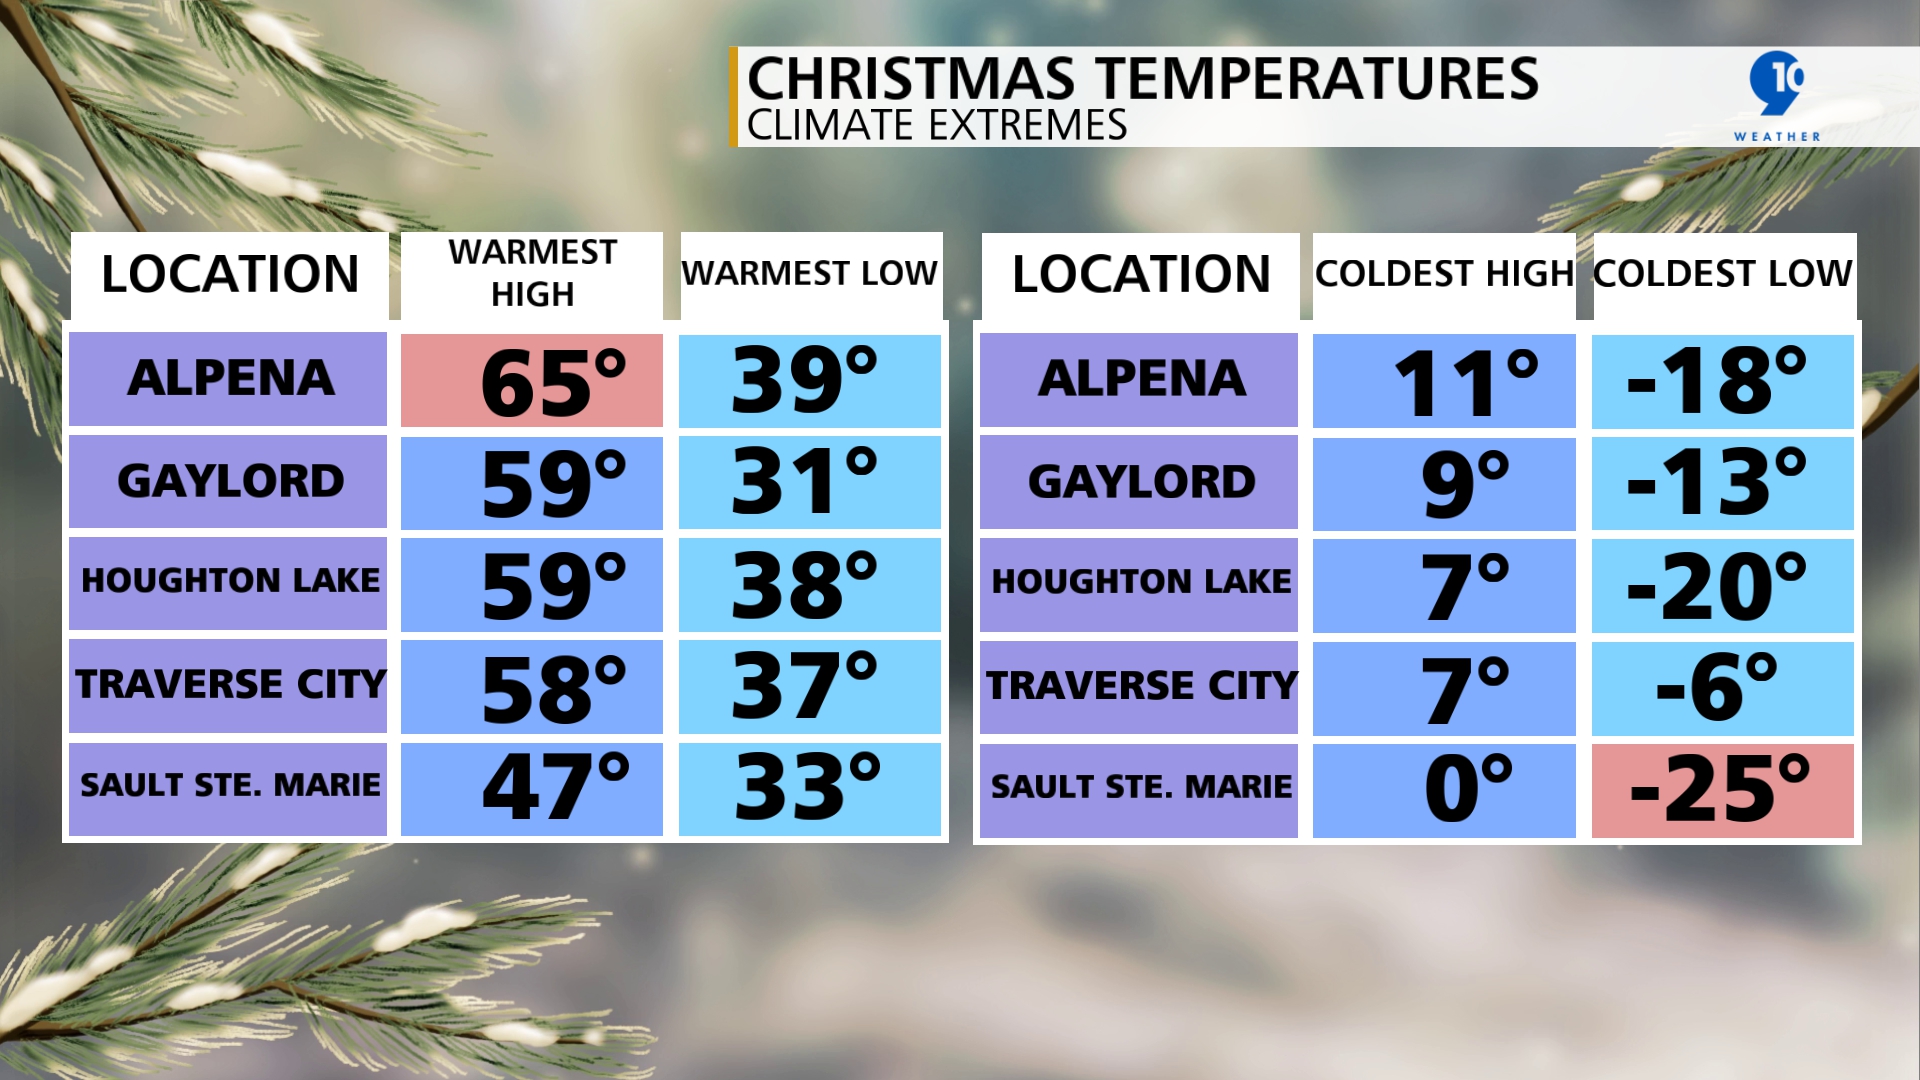 Temperature Extremes for December 25th